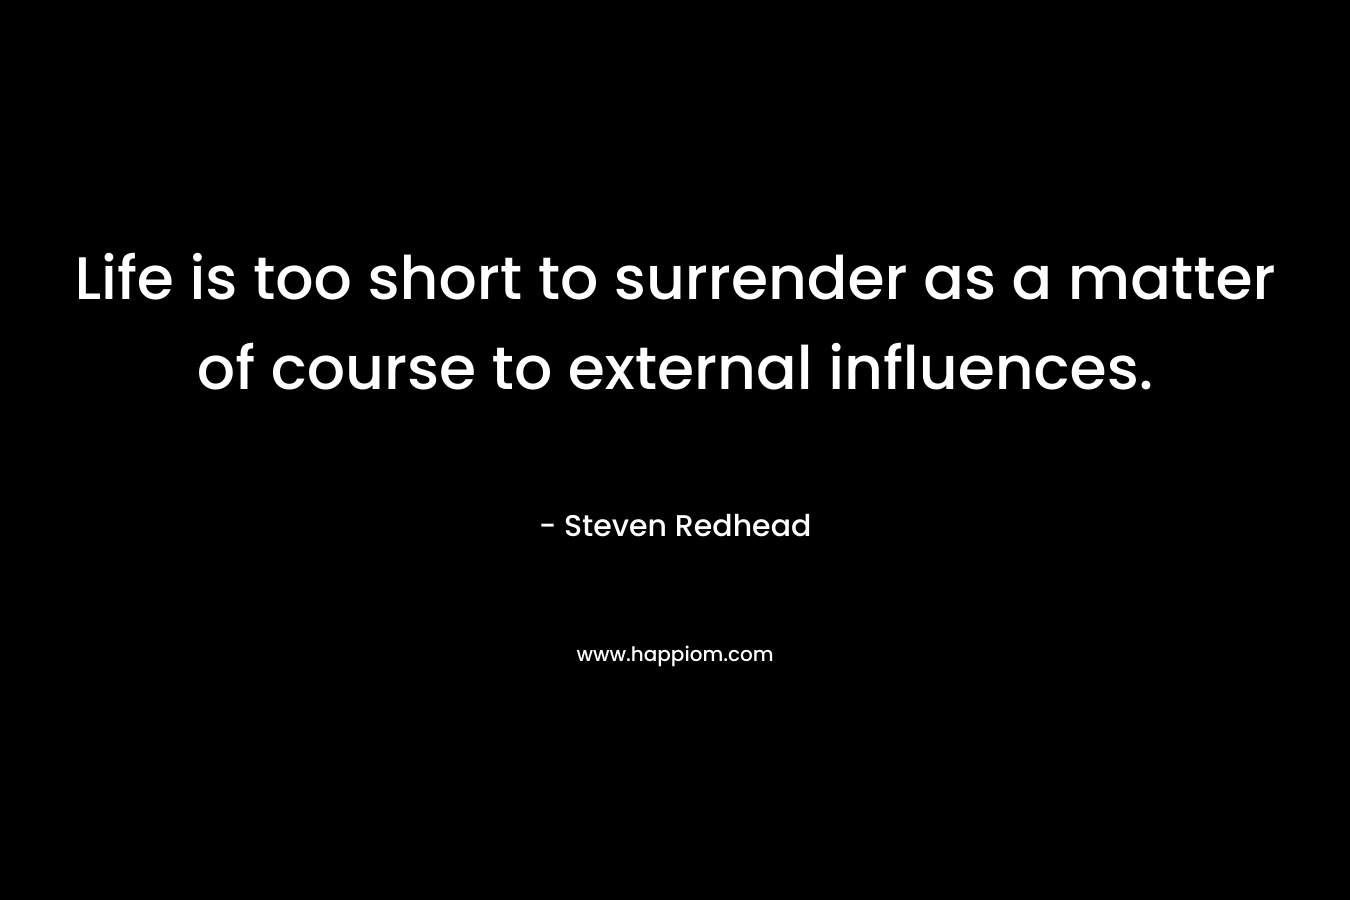 Life is too short to surrender as a matter of course to external influences.